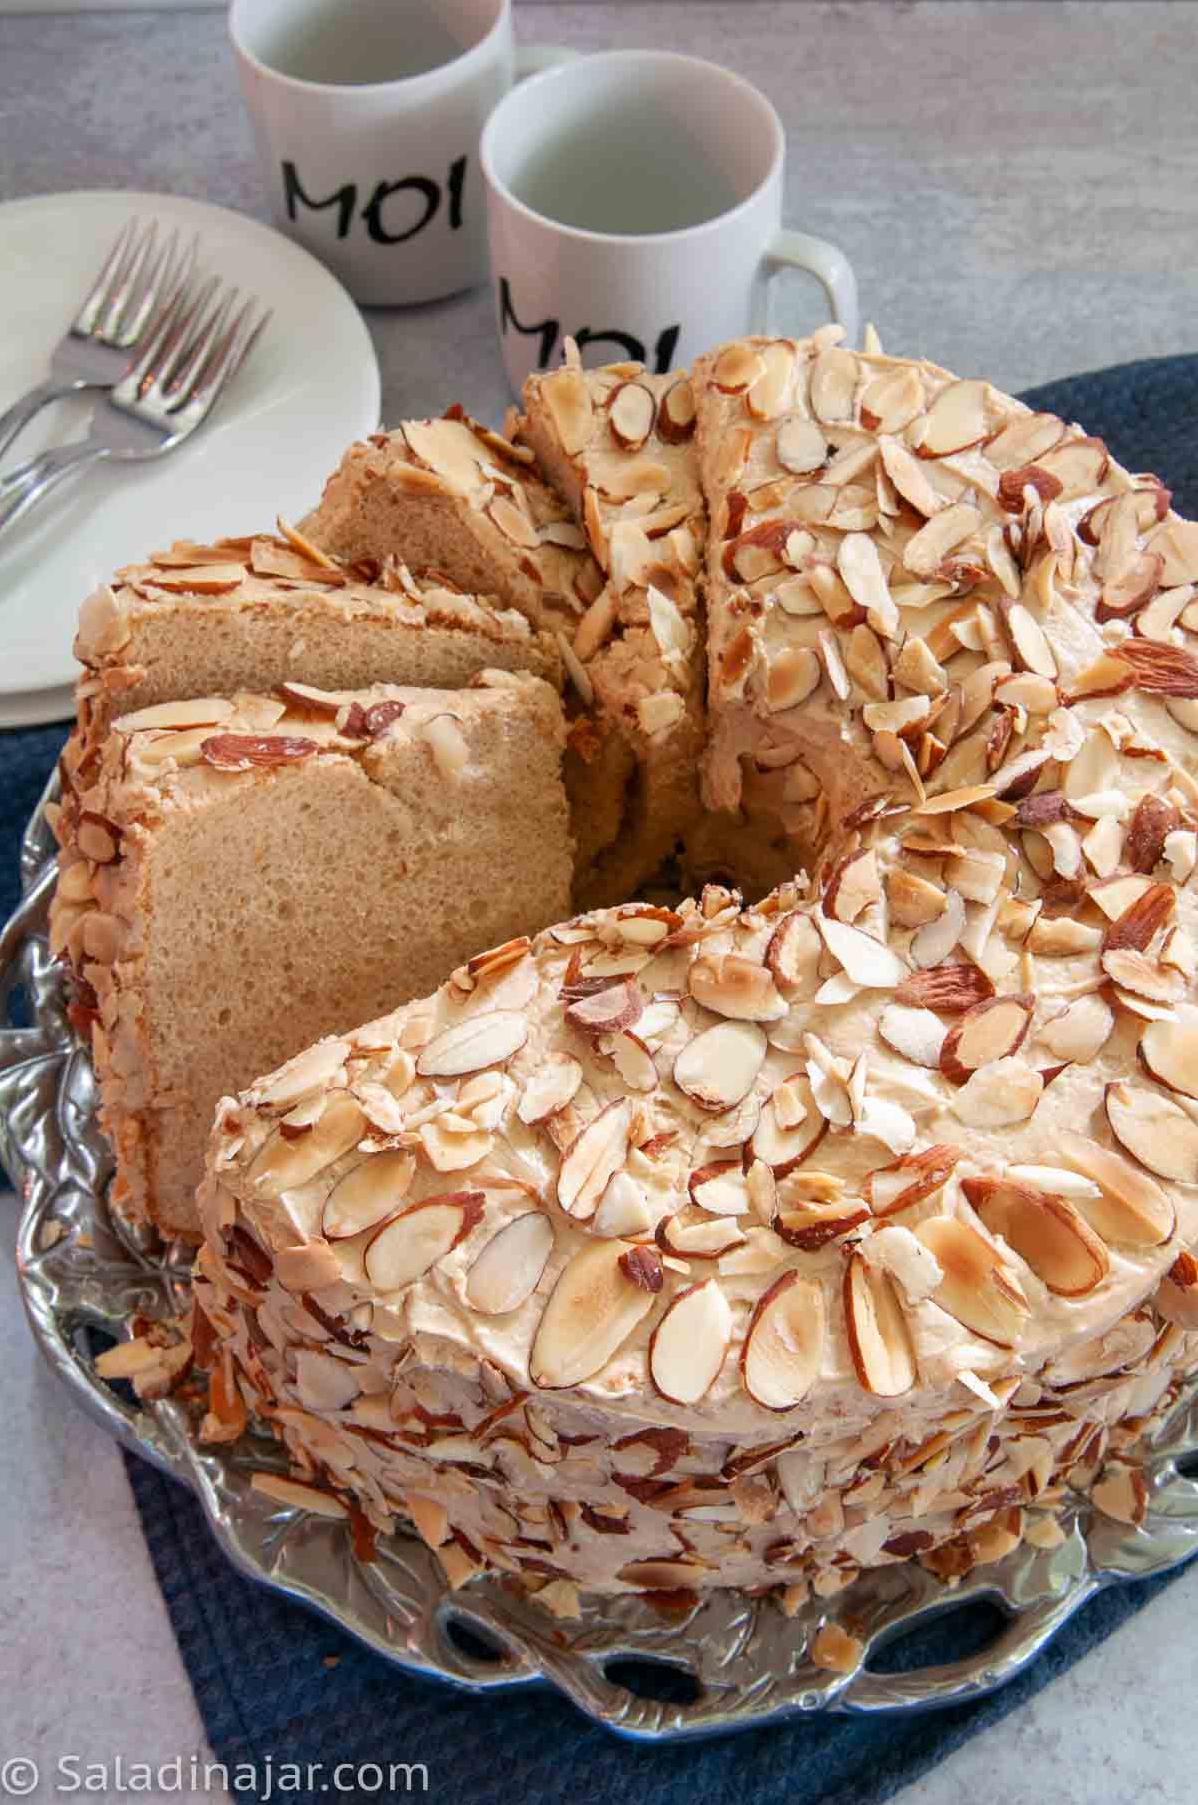  Take your taste buds to heaven with this Coffee Angel Food Cake